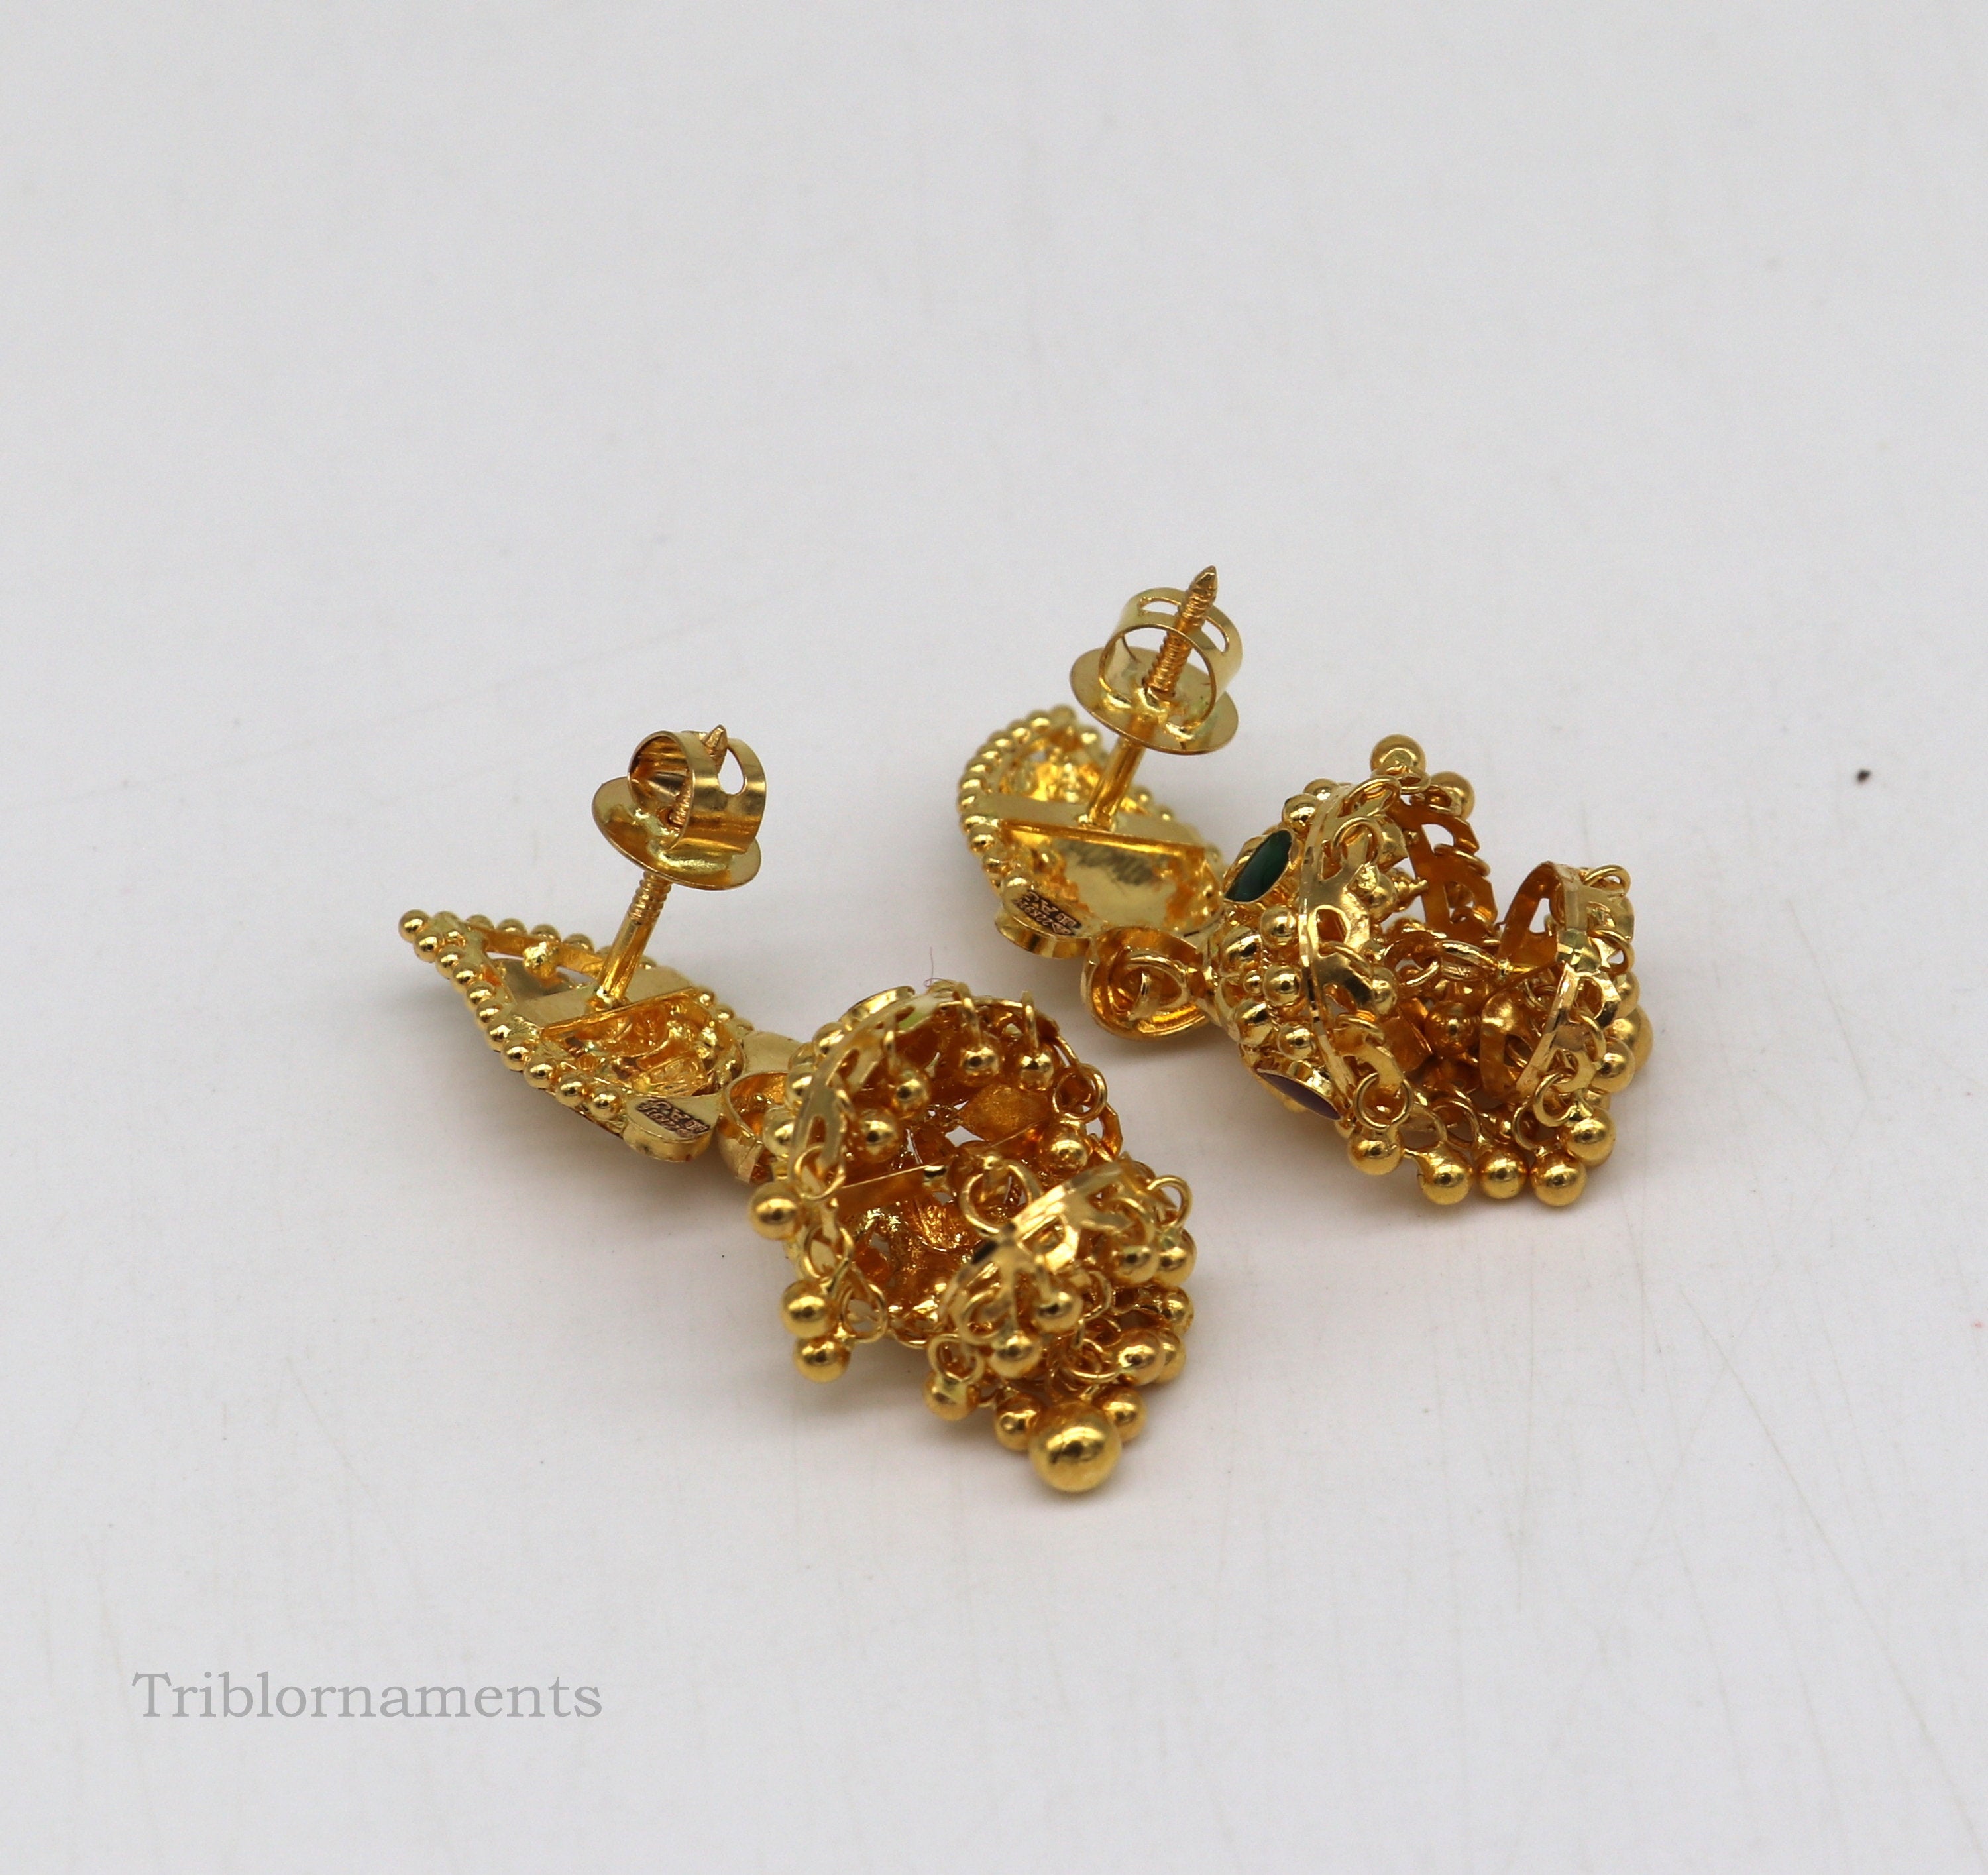 stylish gold stud earring for baby girl/cute and lightweight earrings for  babygirl..gold 2022 - YouTube